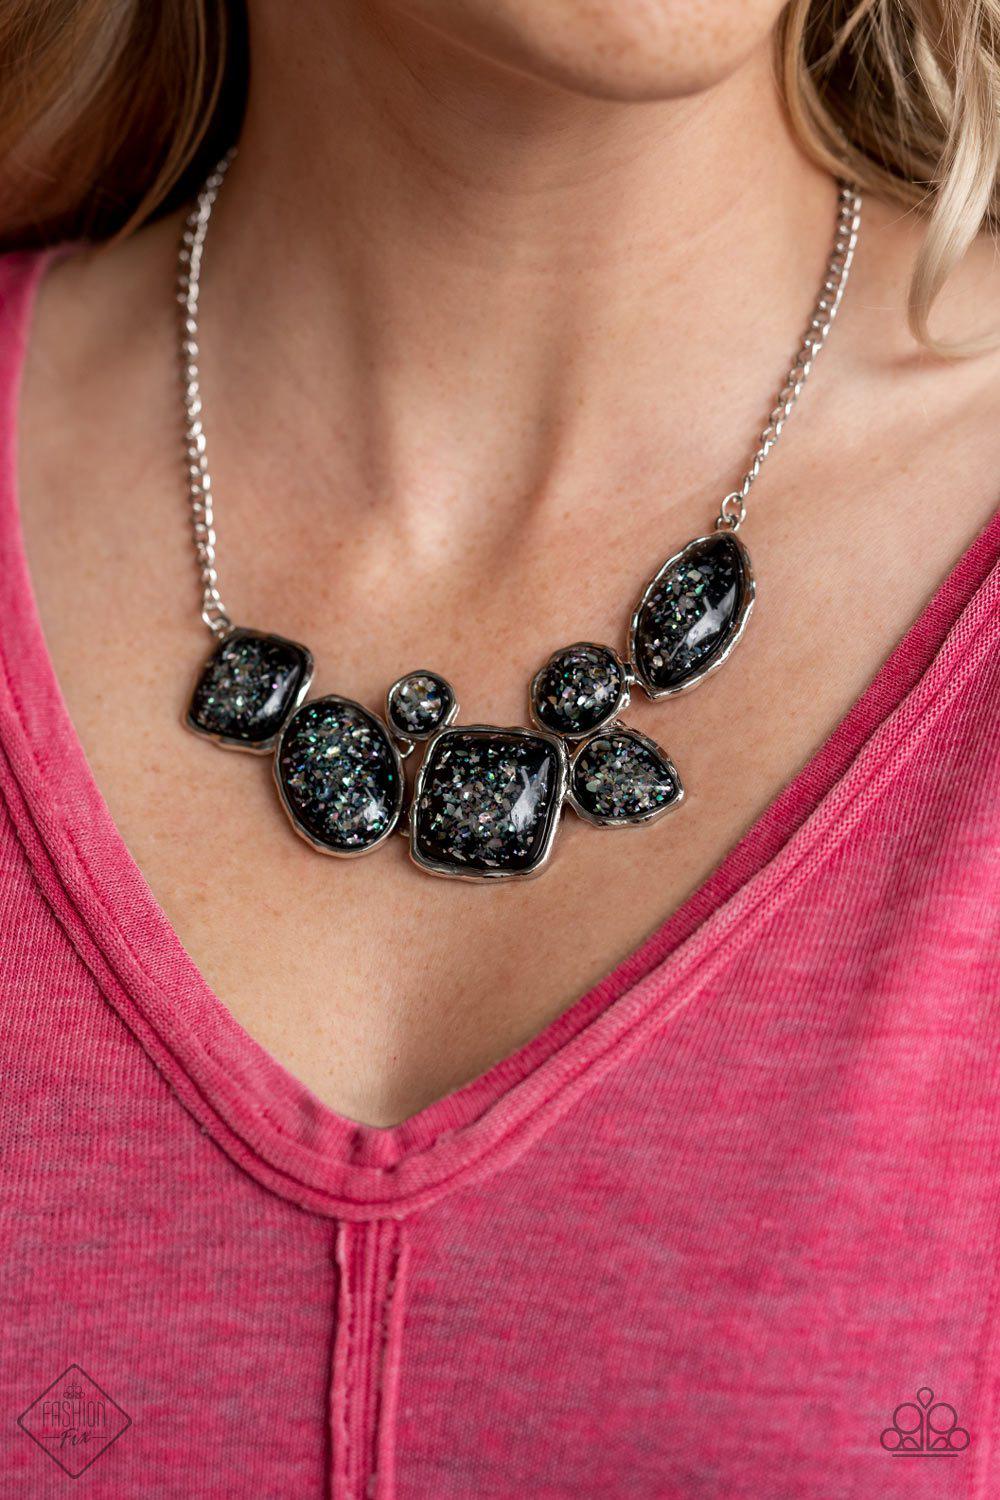 So Jelly Black and Iridescent Bead Necklace - Paparazzi Accessories- lightbox - CarasShop.com - $5 Jewelry by Cara Jewels